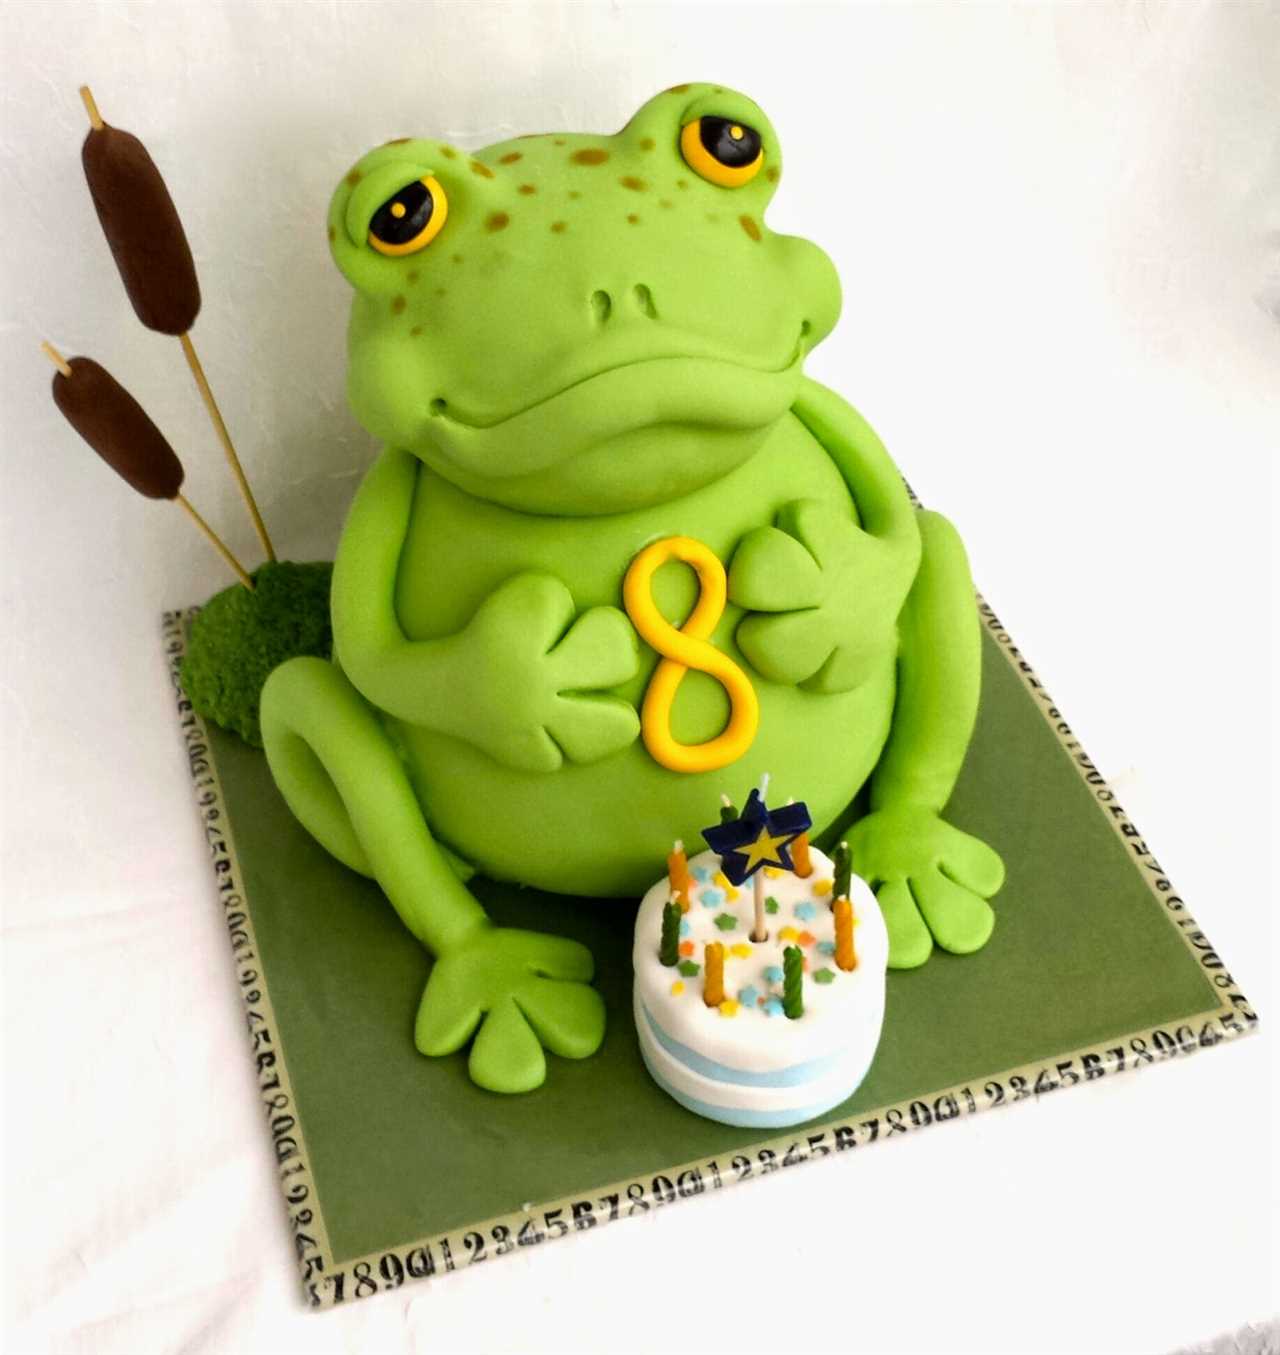 How to make a frog cake